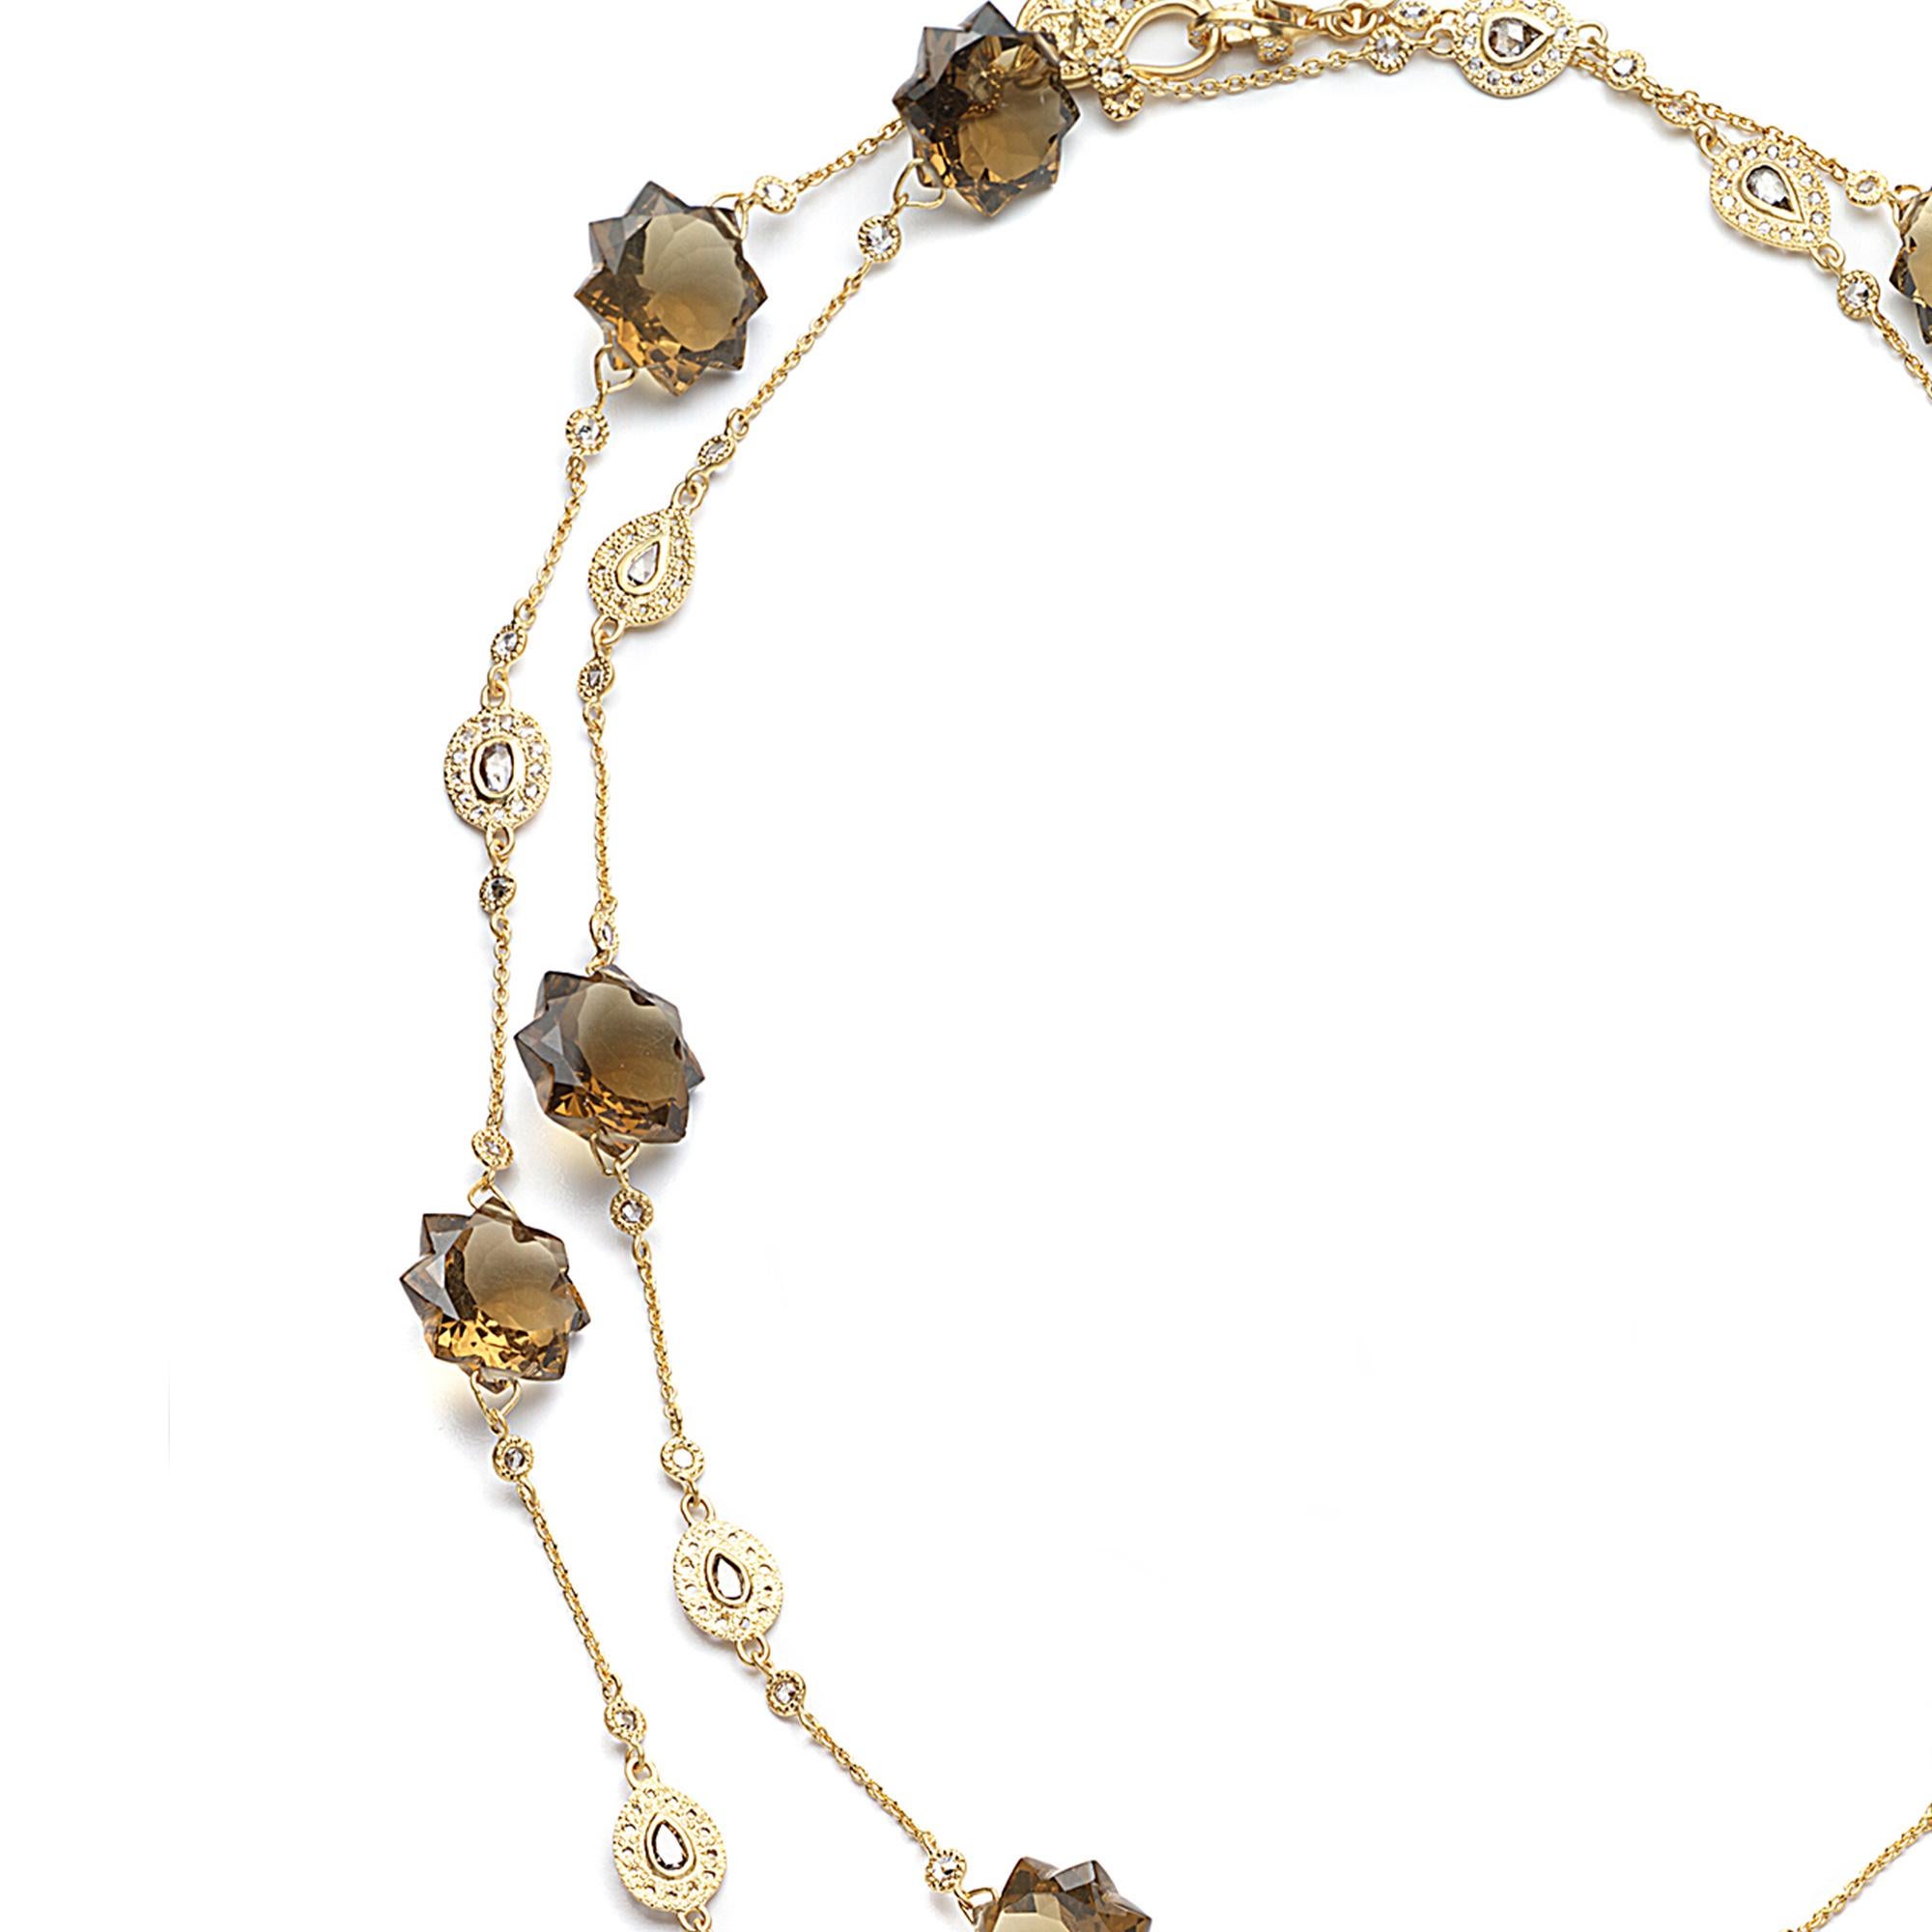 Contemporary Long Starburst Necklace in 20K Yellow Gold with Cognac Quartz and Diamonds For Sale